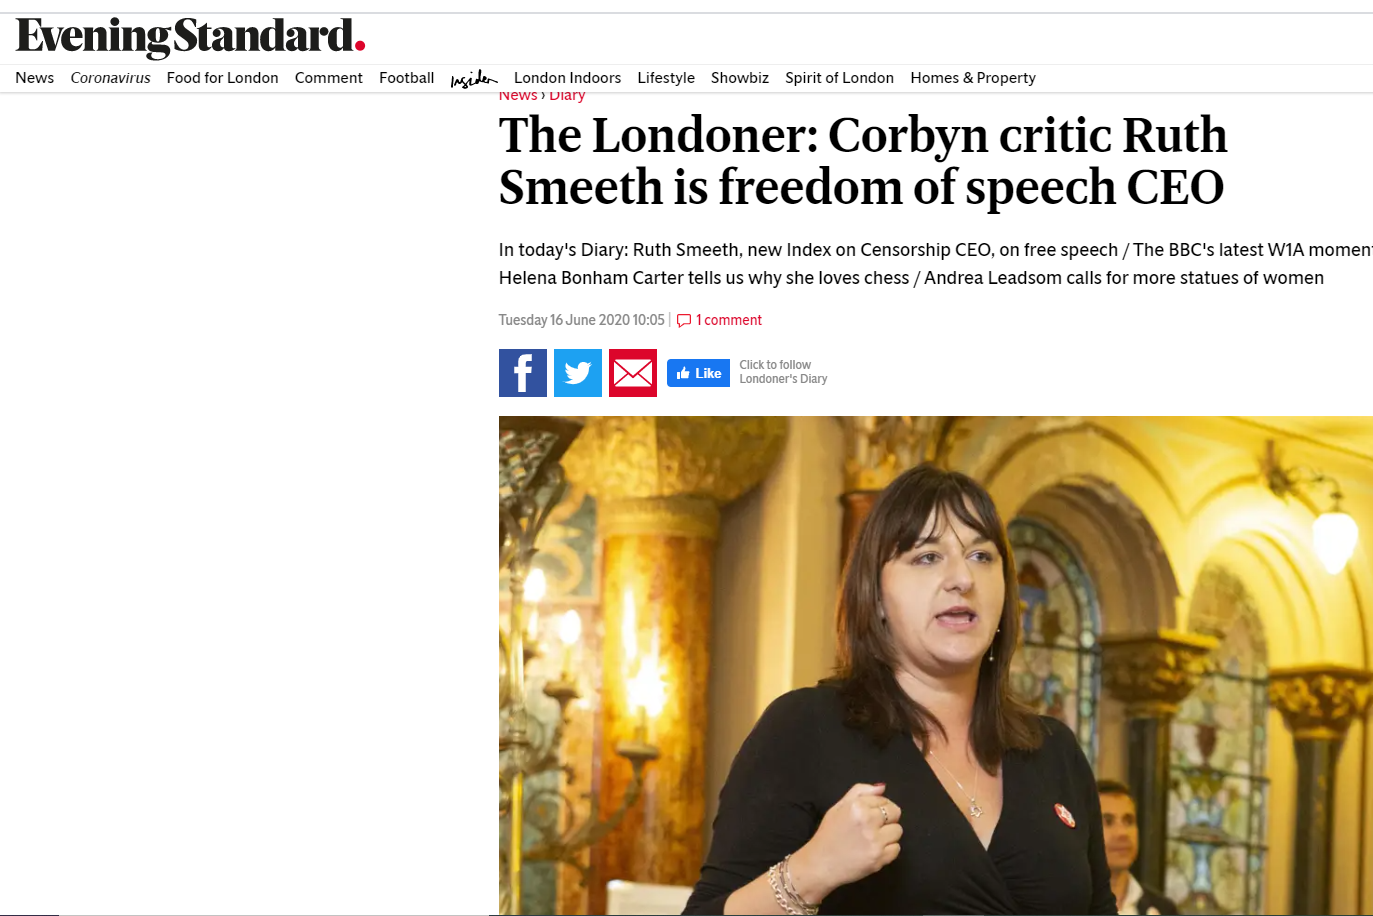 The Londoner: Corbyn critic Ruth Smeeth is freedom of speech CEO (Evening Standard)